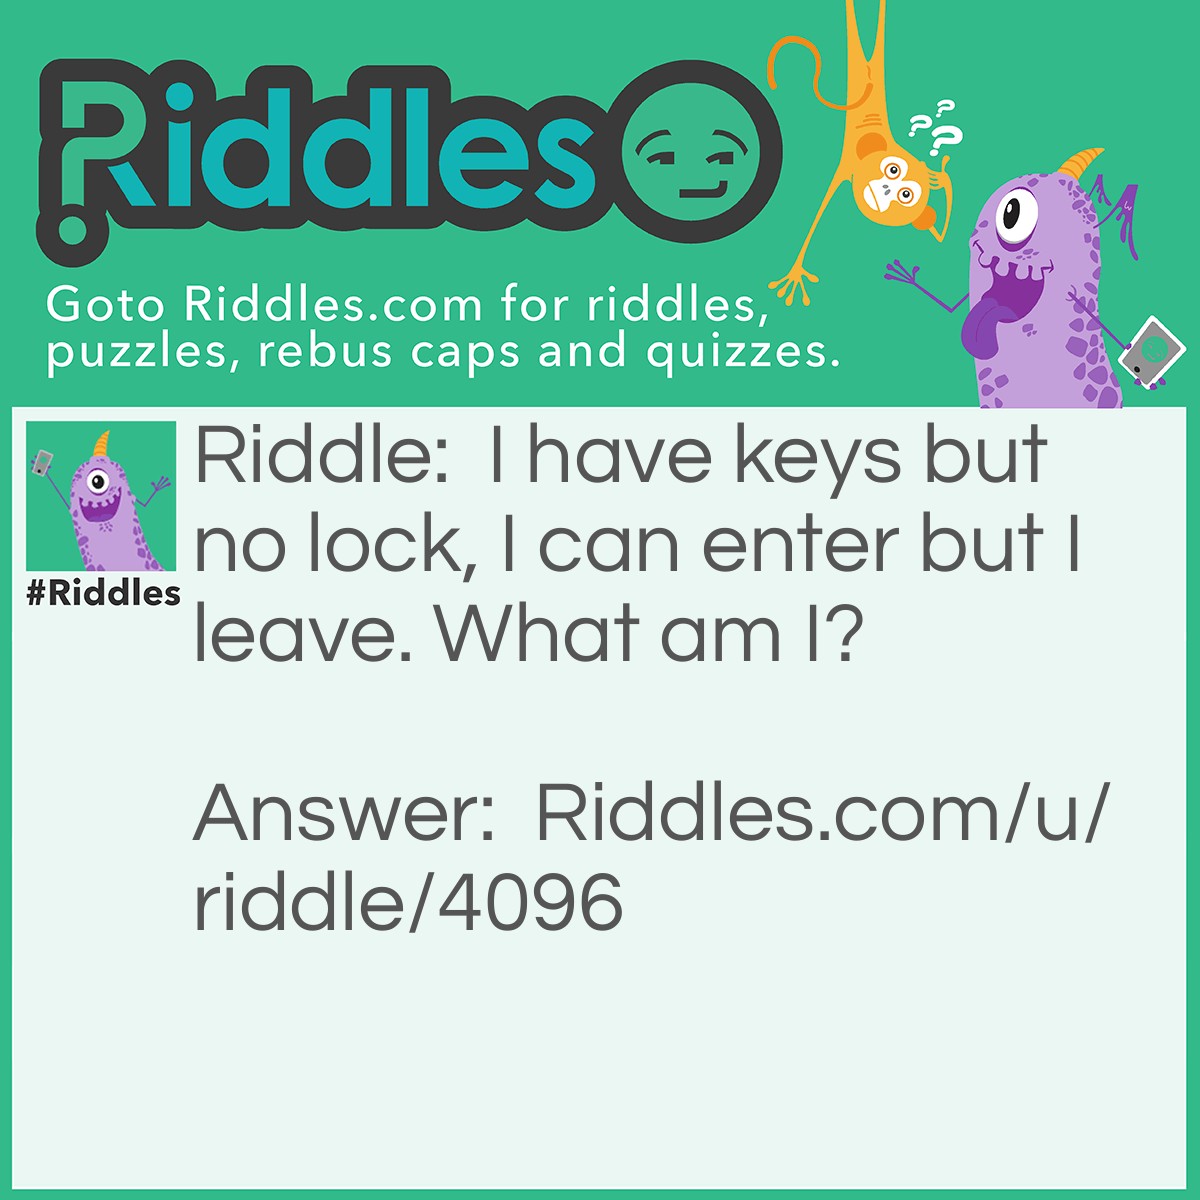 Riddle: I have keys but no lock, I can enter but I leave. What am I? Answer: A keyboard.